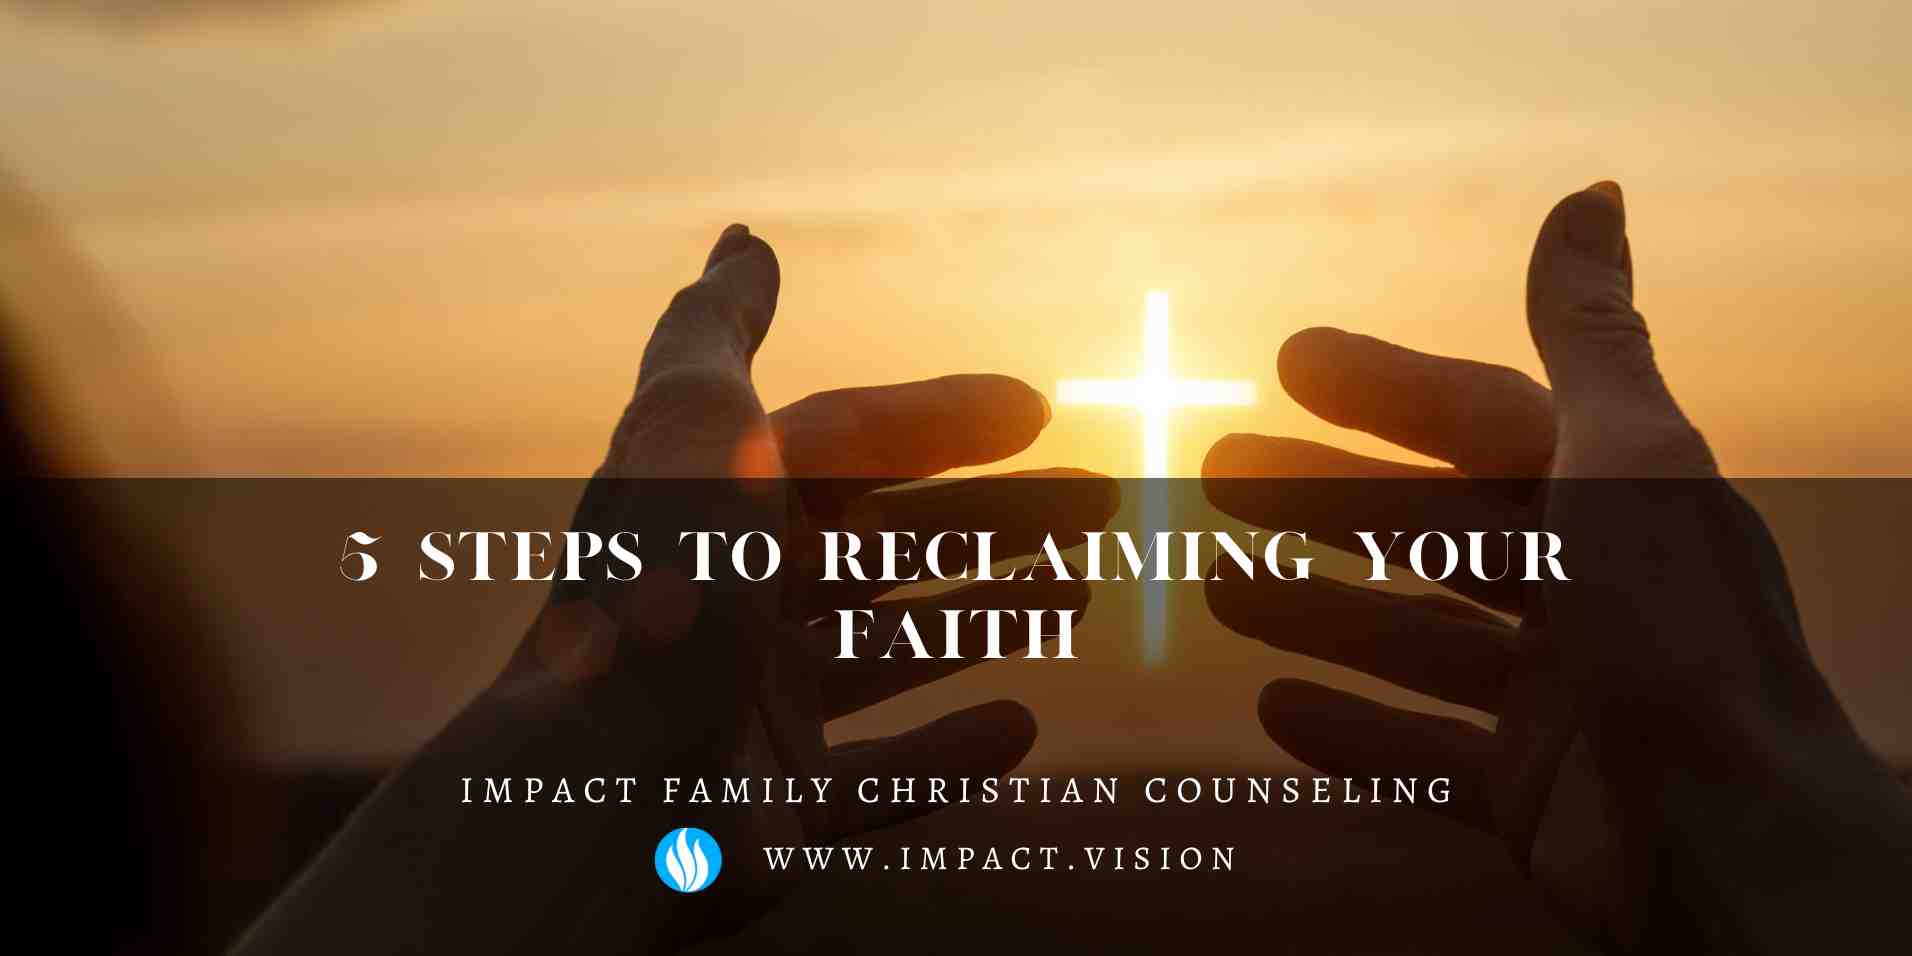 5 Steps to Reclaiming Your Faith